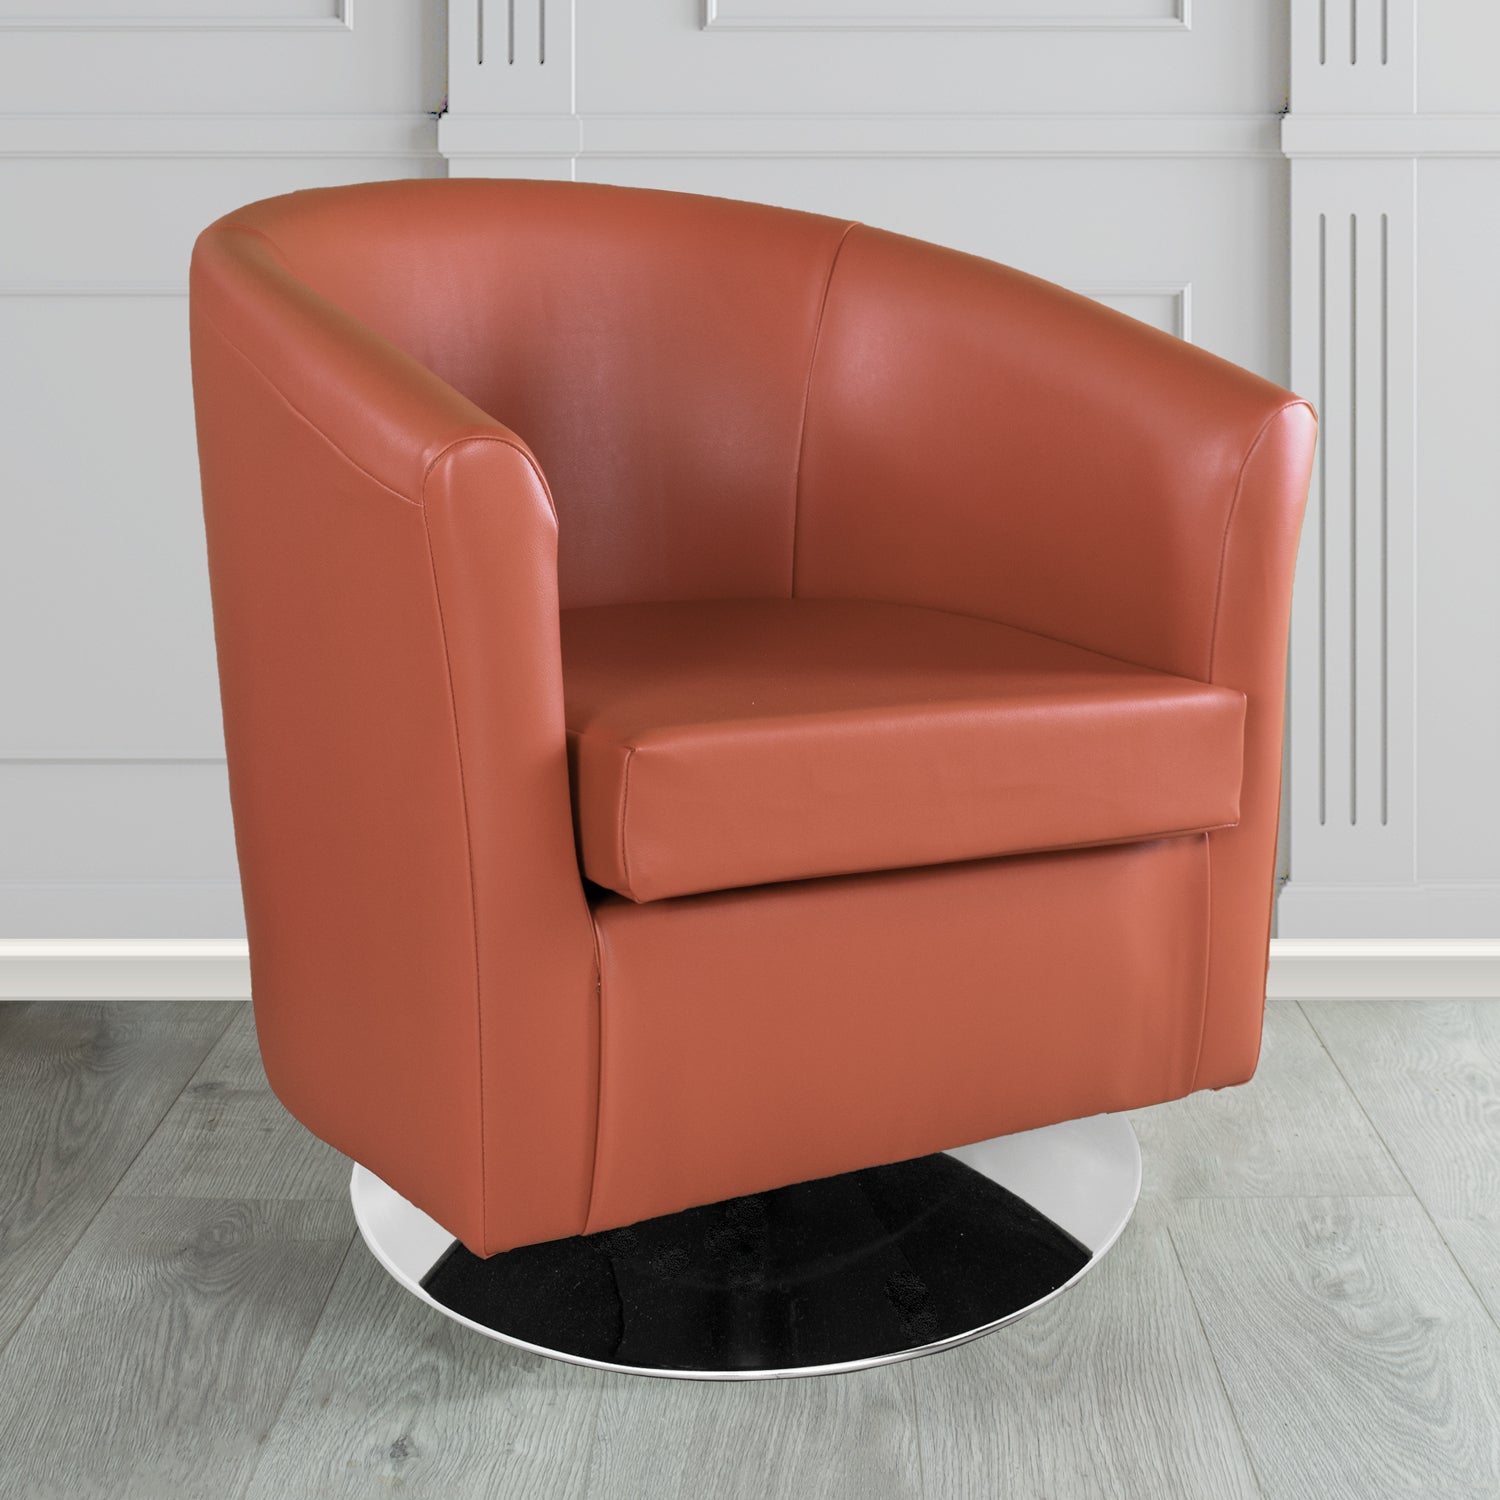 St Tropez Just Colour Rusty Crib 5 Faux Leather Swivel Tub Chair (4524082004010)